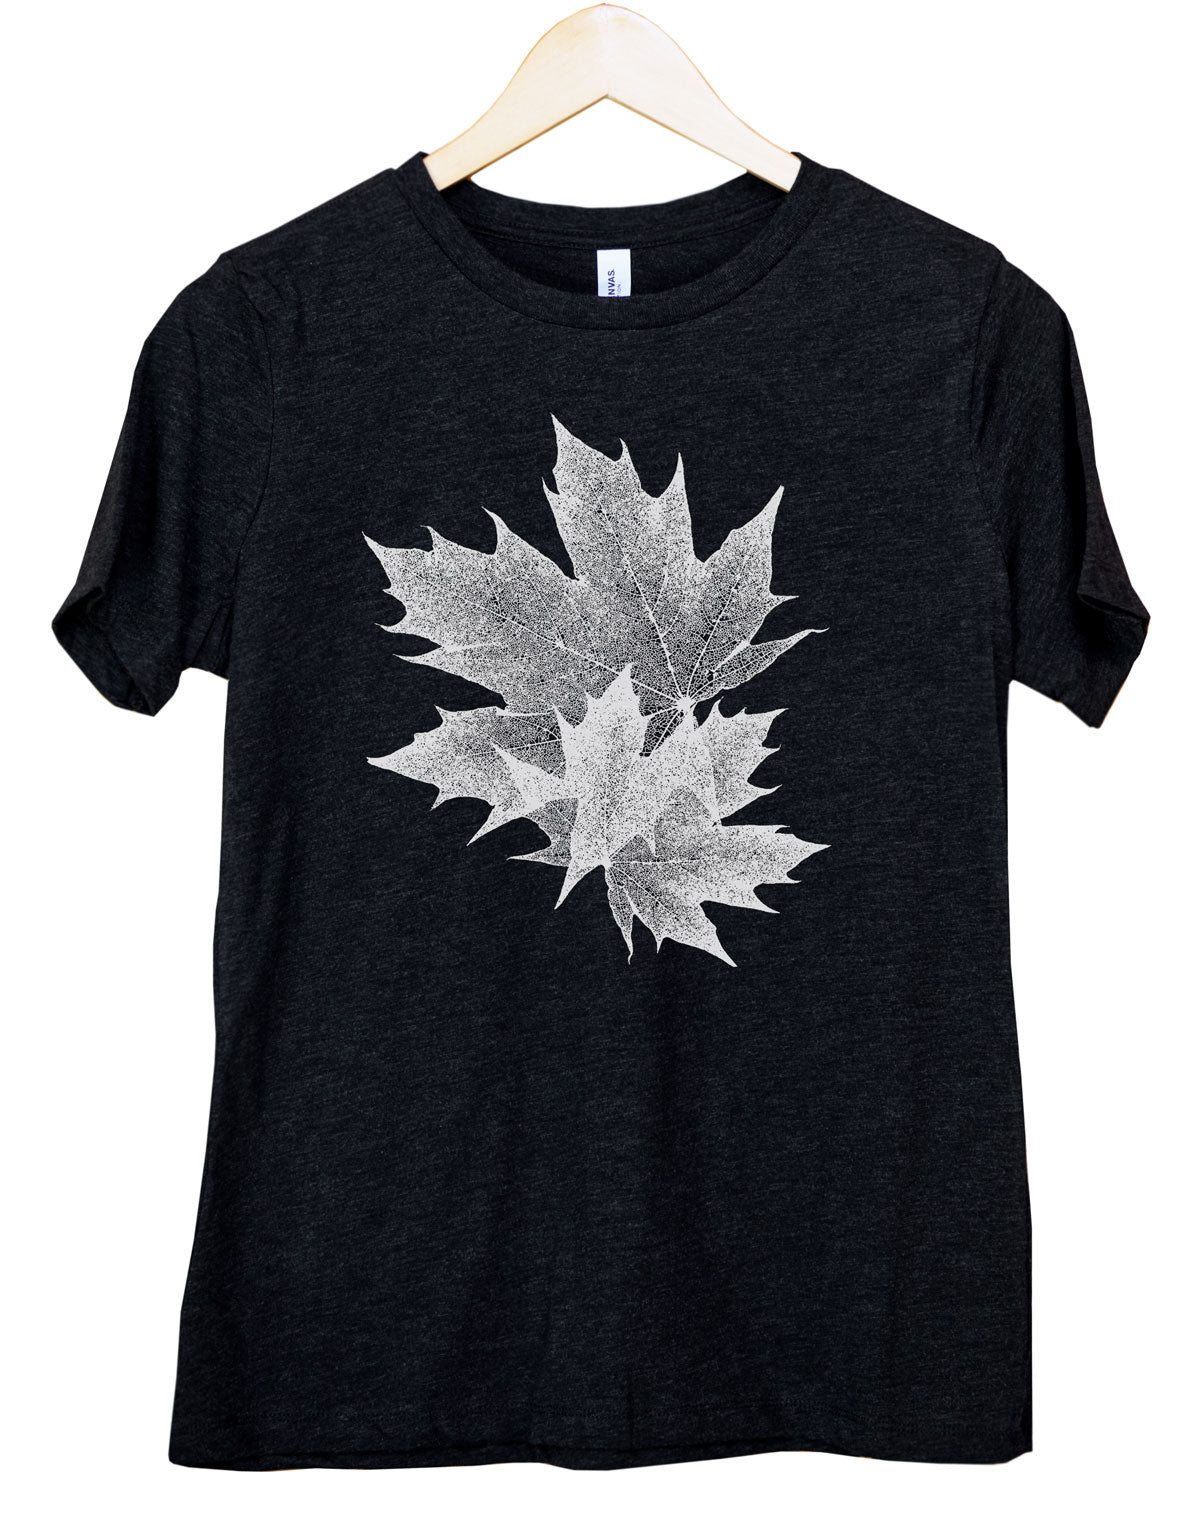 Maple Leaves - Women's Graphic T-Shirt